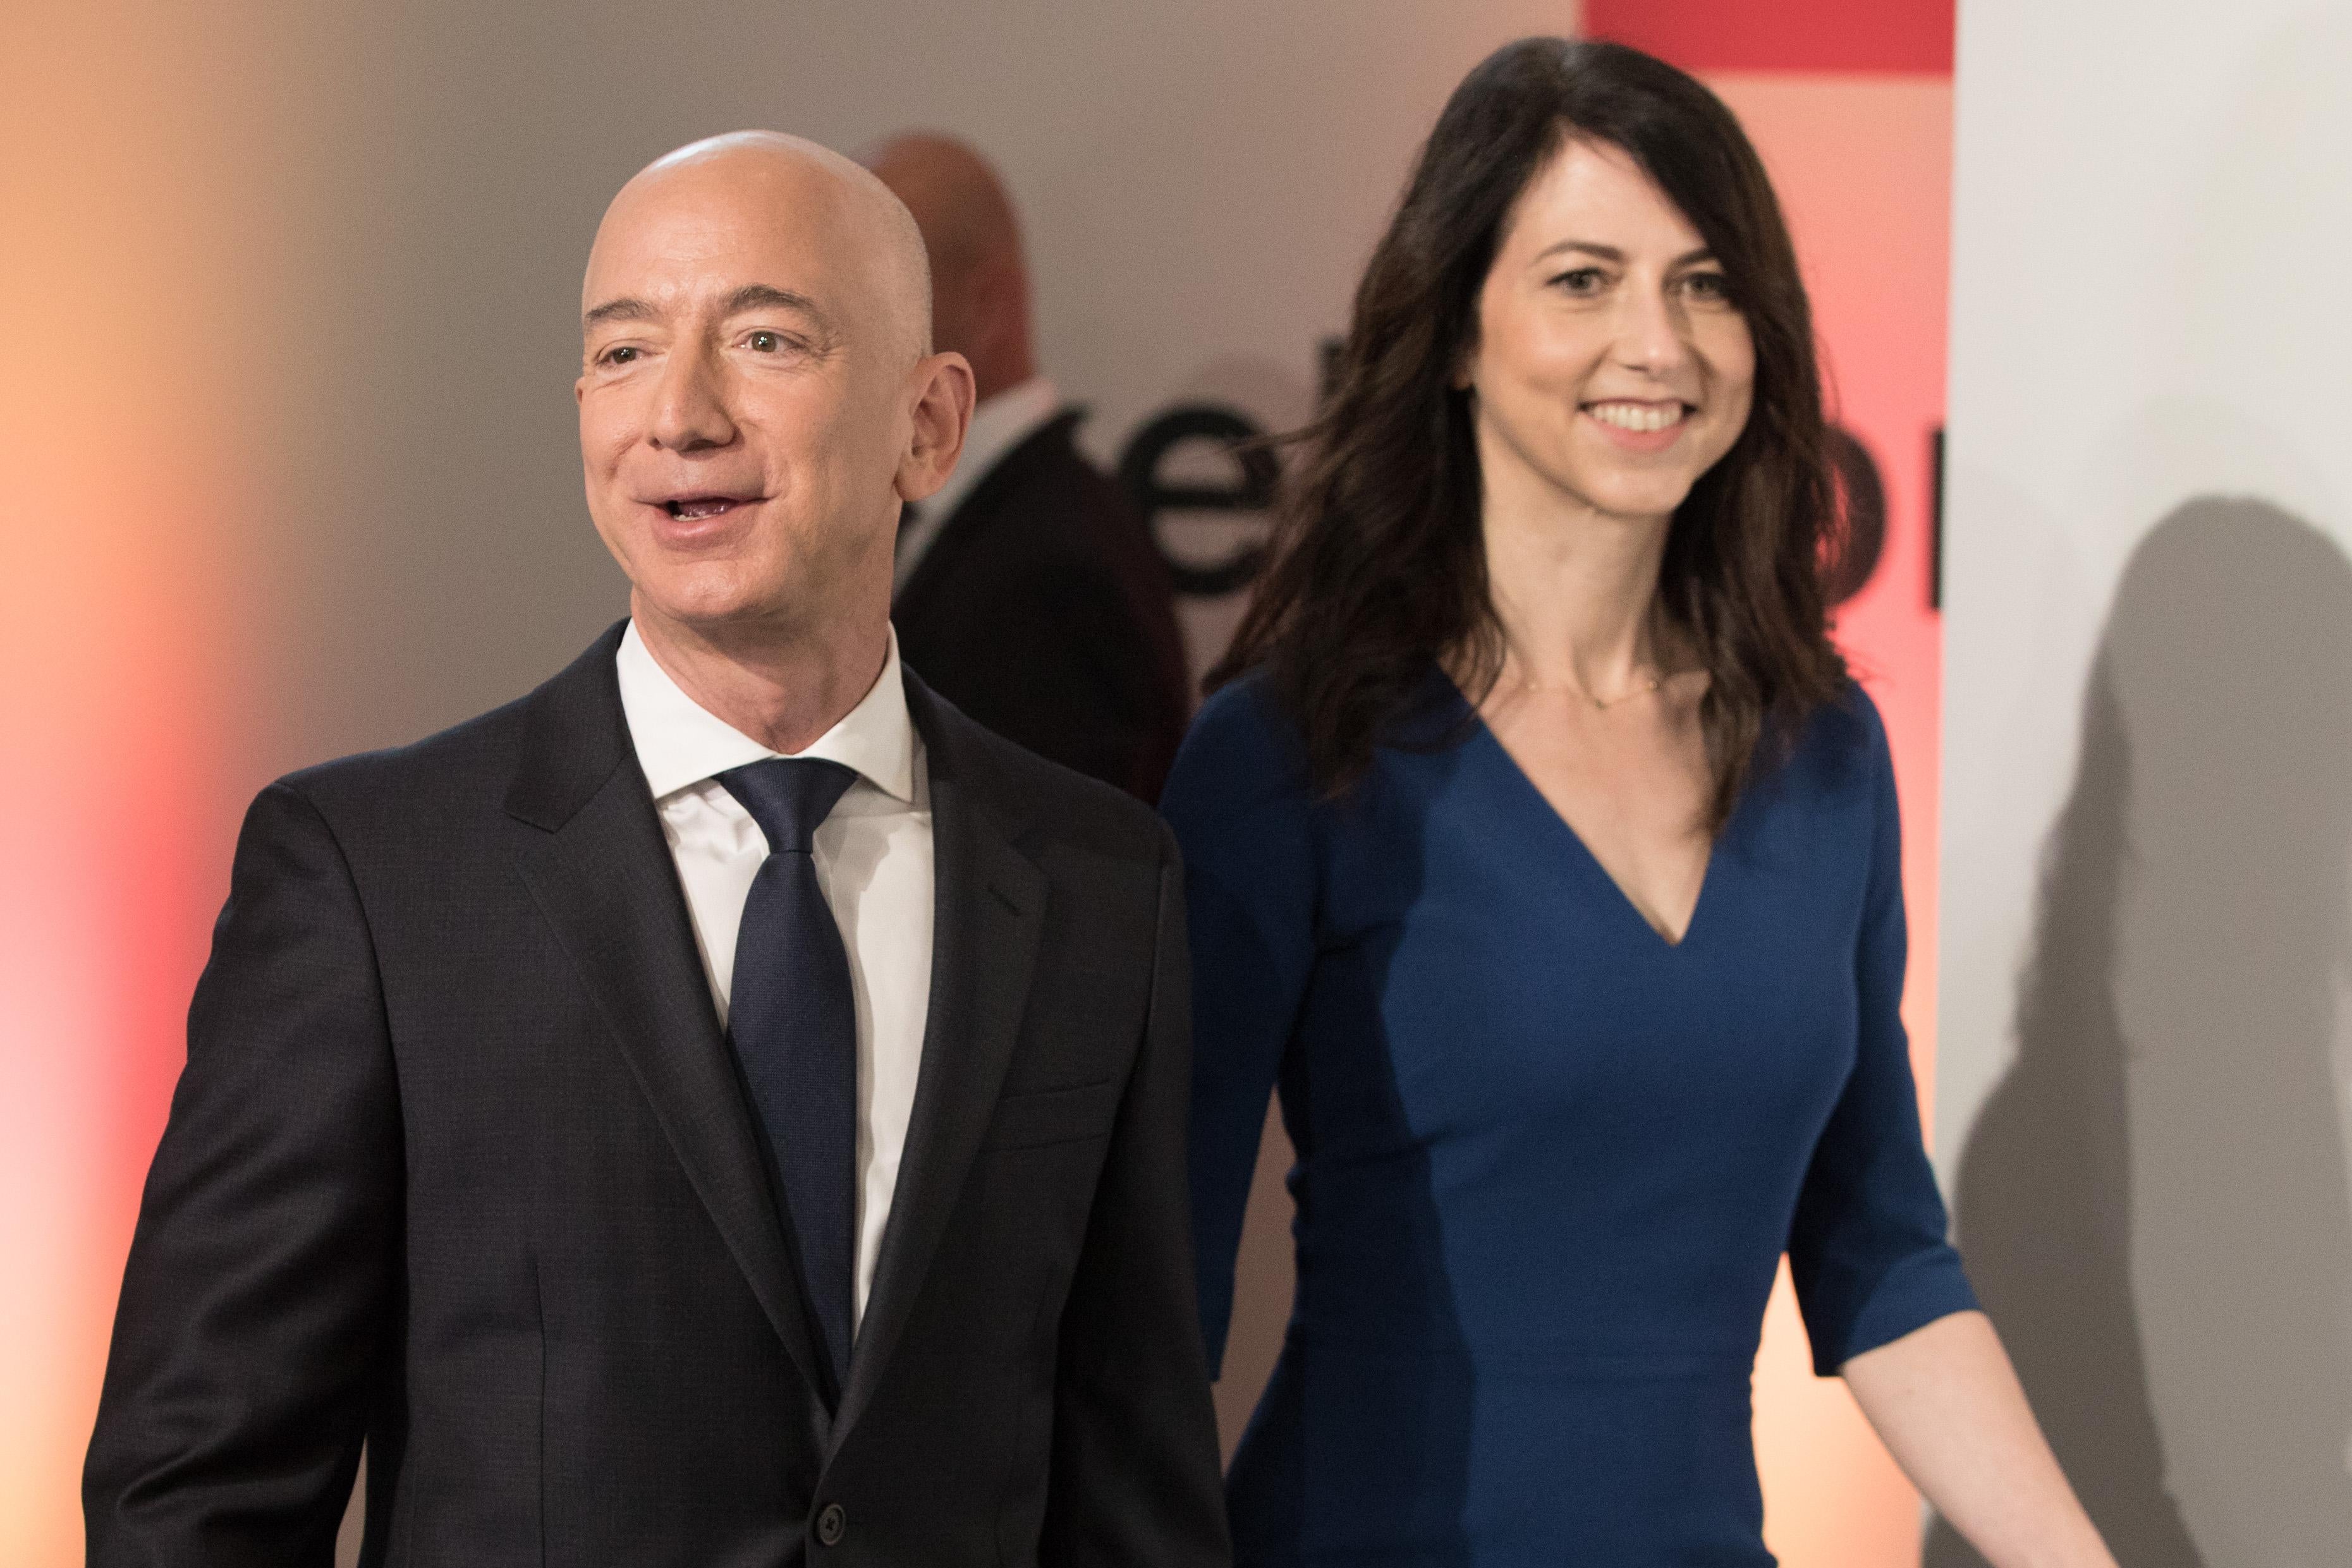 Amazon CEO Jeff Bezos and his wife MacKenzie Bezos arrive at an event.